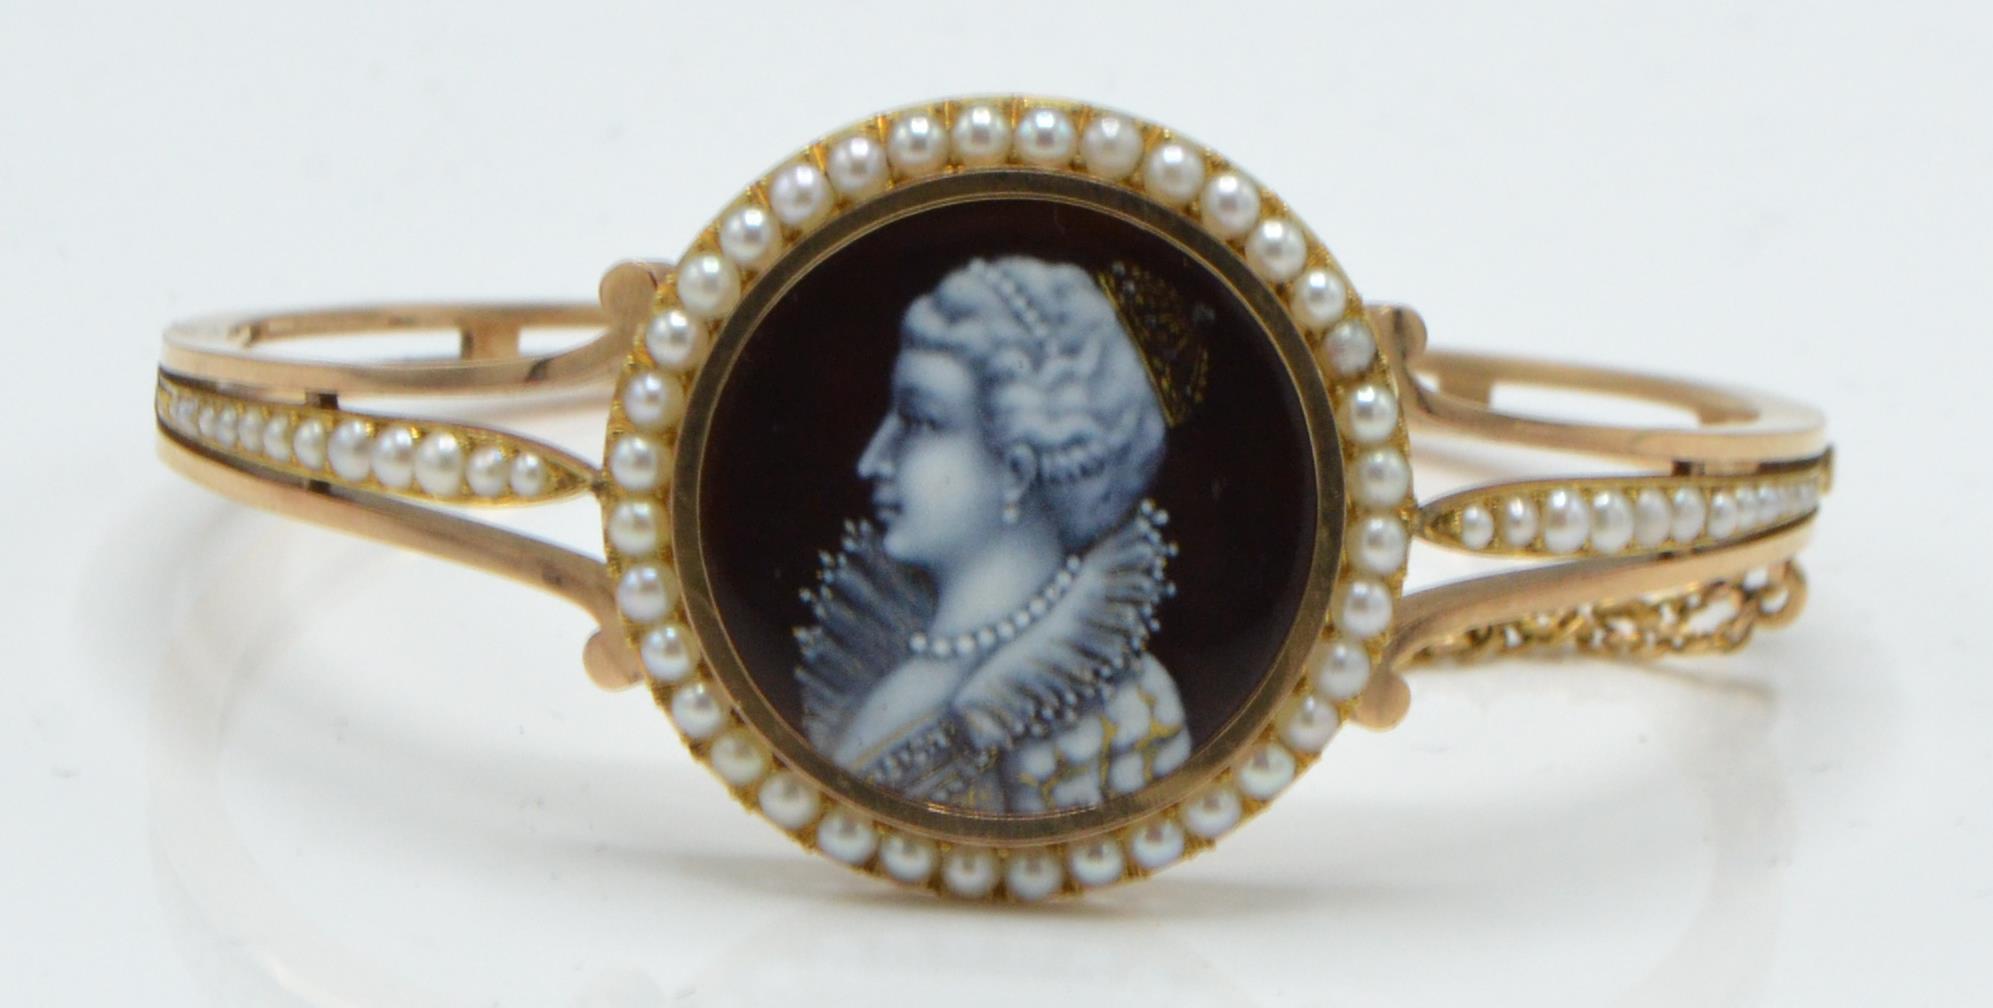 A 19TH CENTURY GOLD & SEED PEARL HINGED BANGLE BRACELET - Image 5 of 5